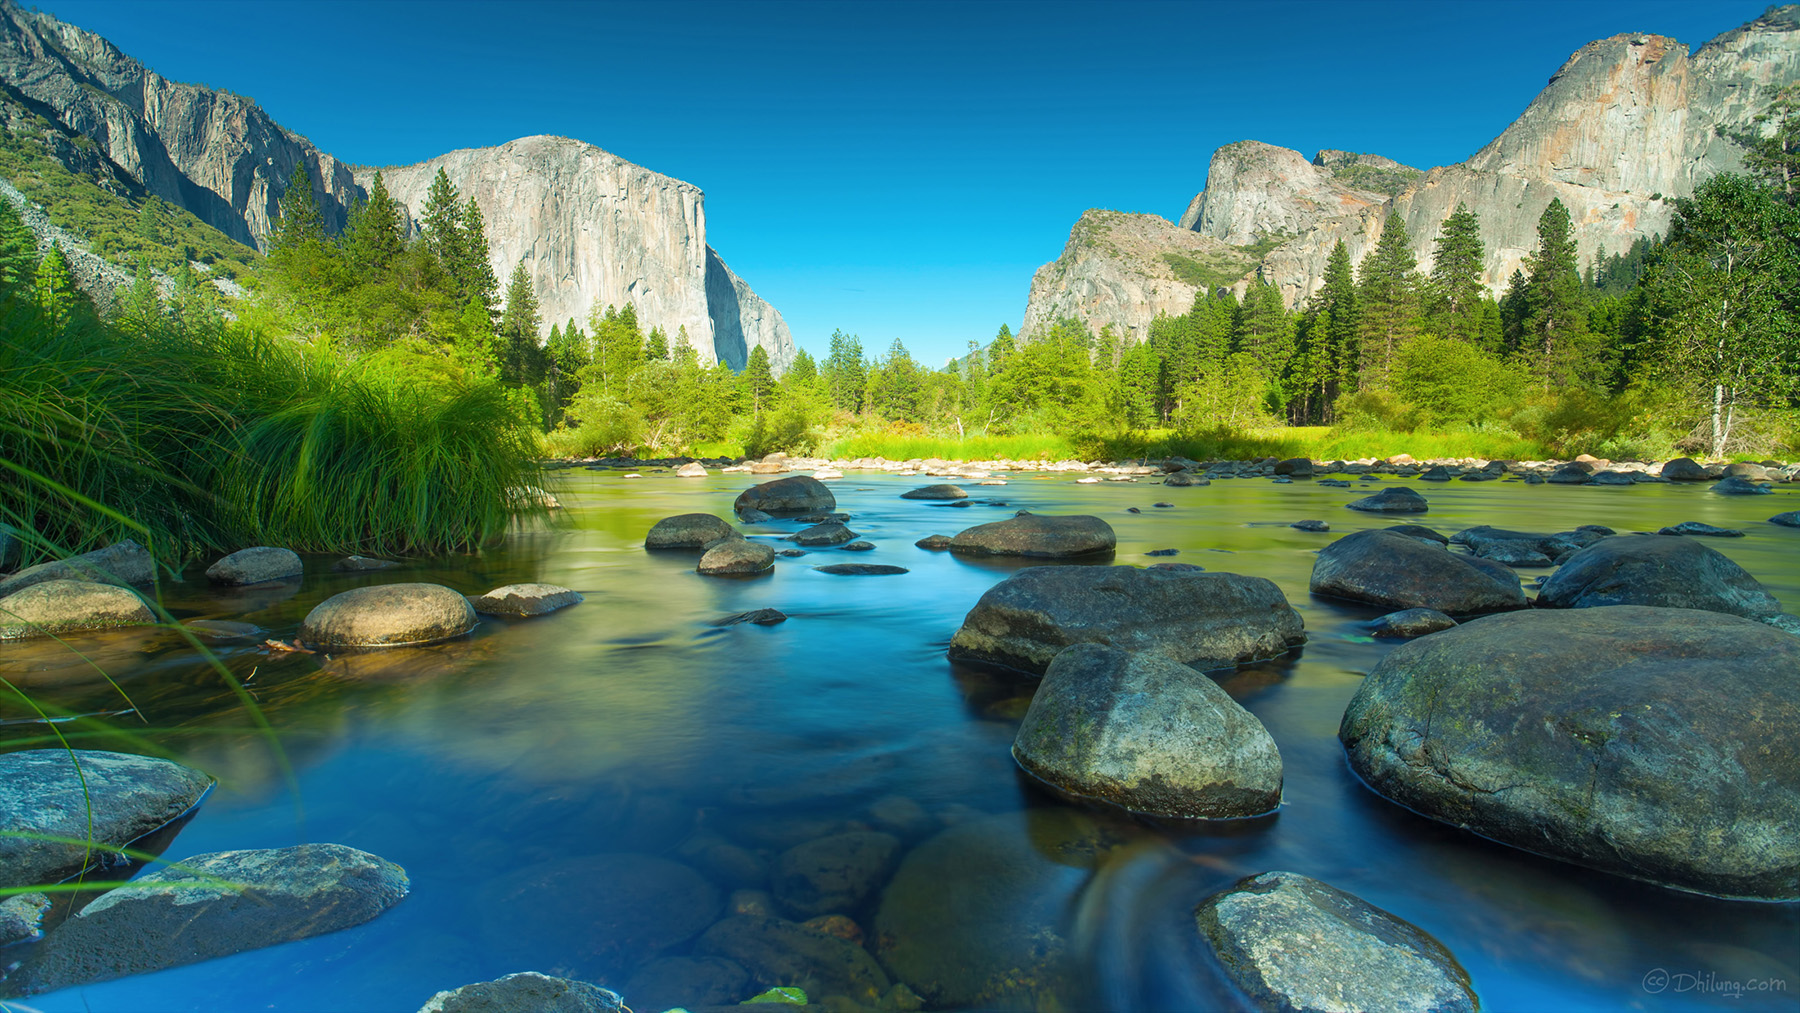 Yosemite Classic - The classic view of the El Capitan and the Merced river in the Yosemite National Park.